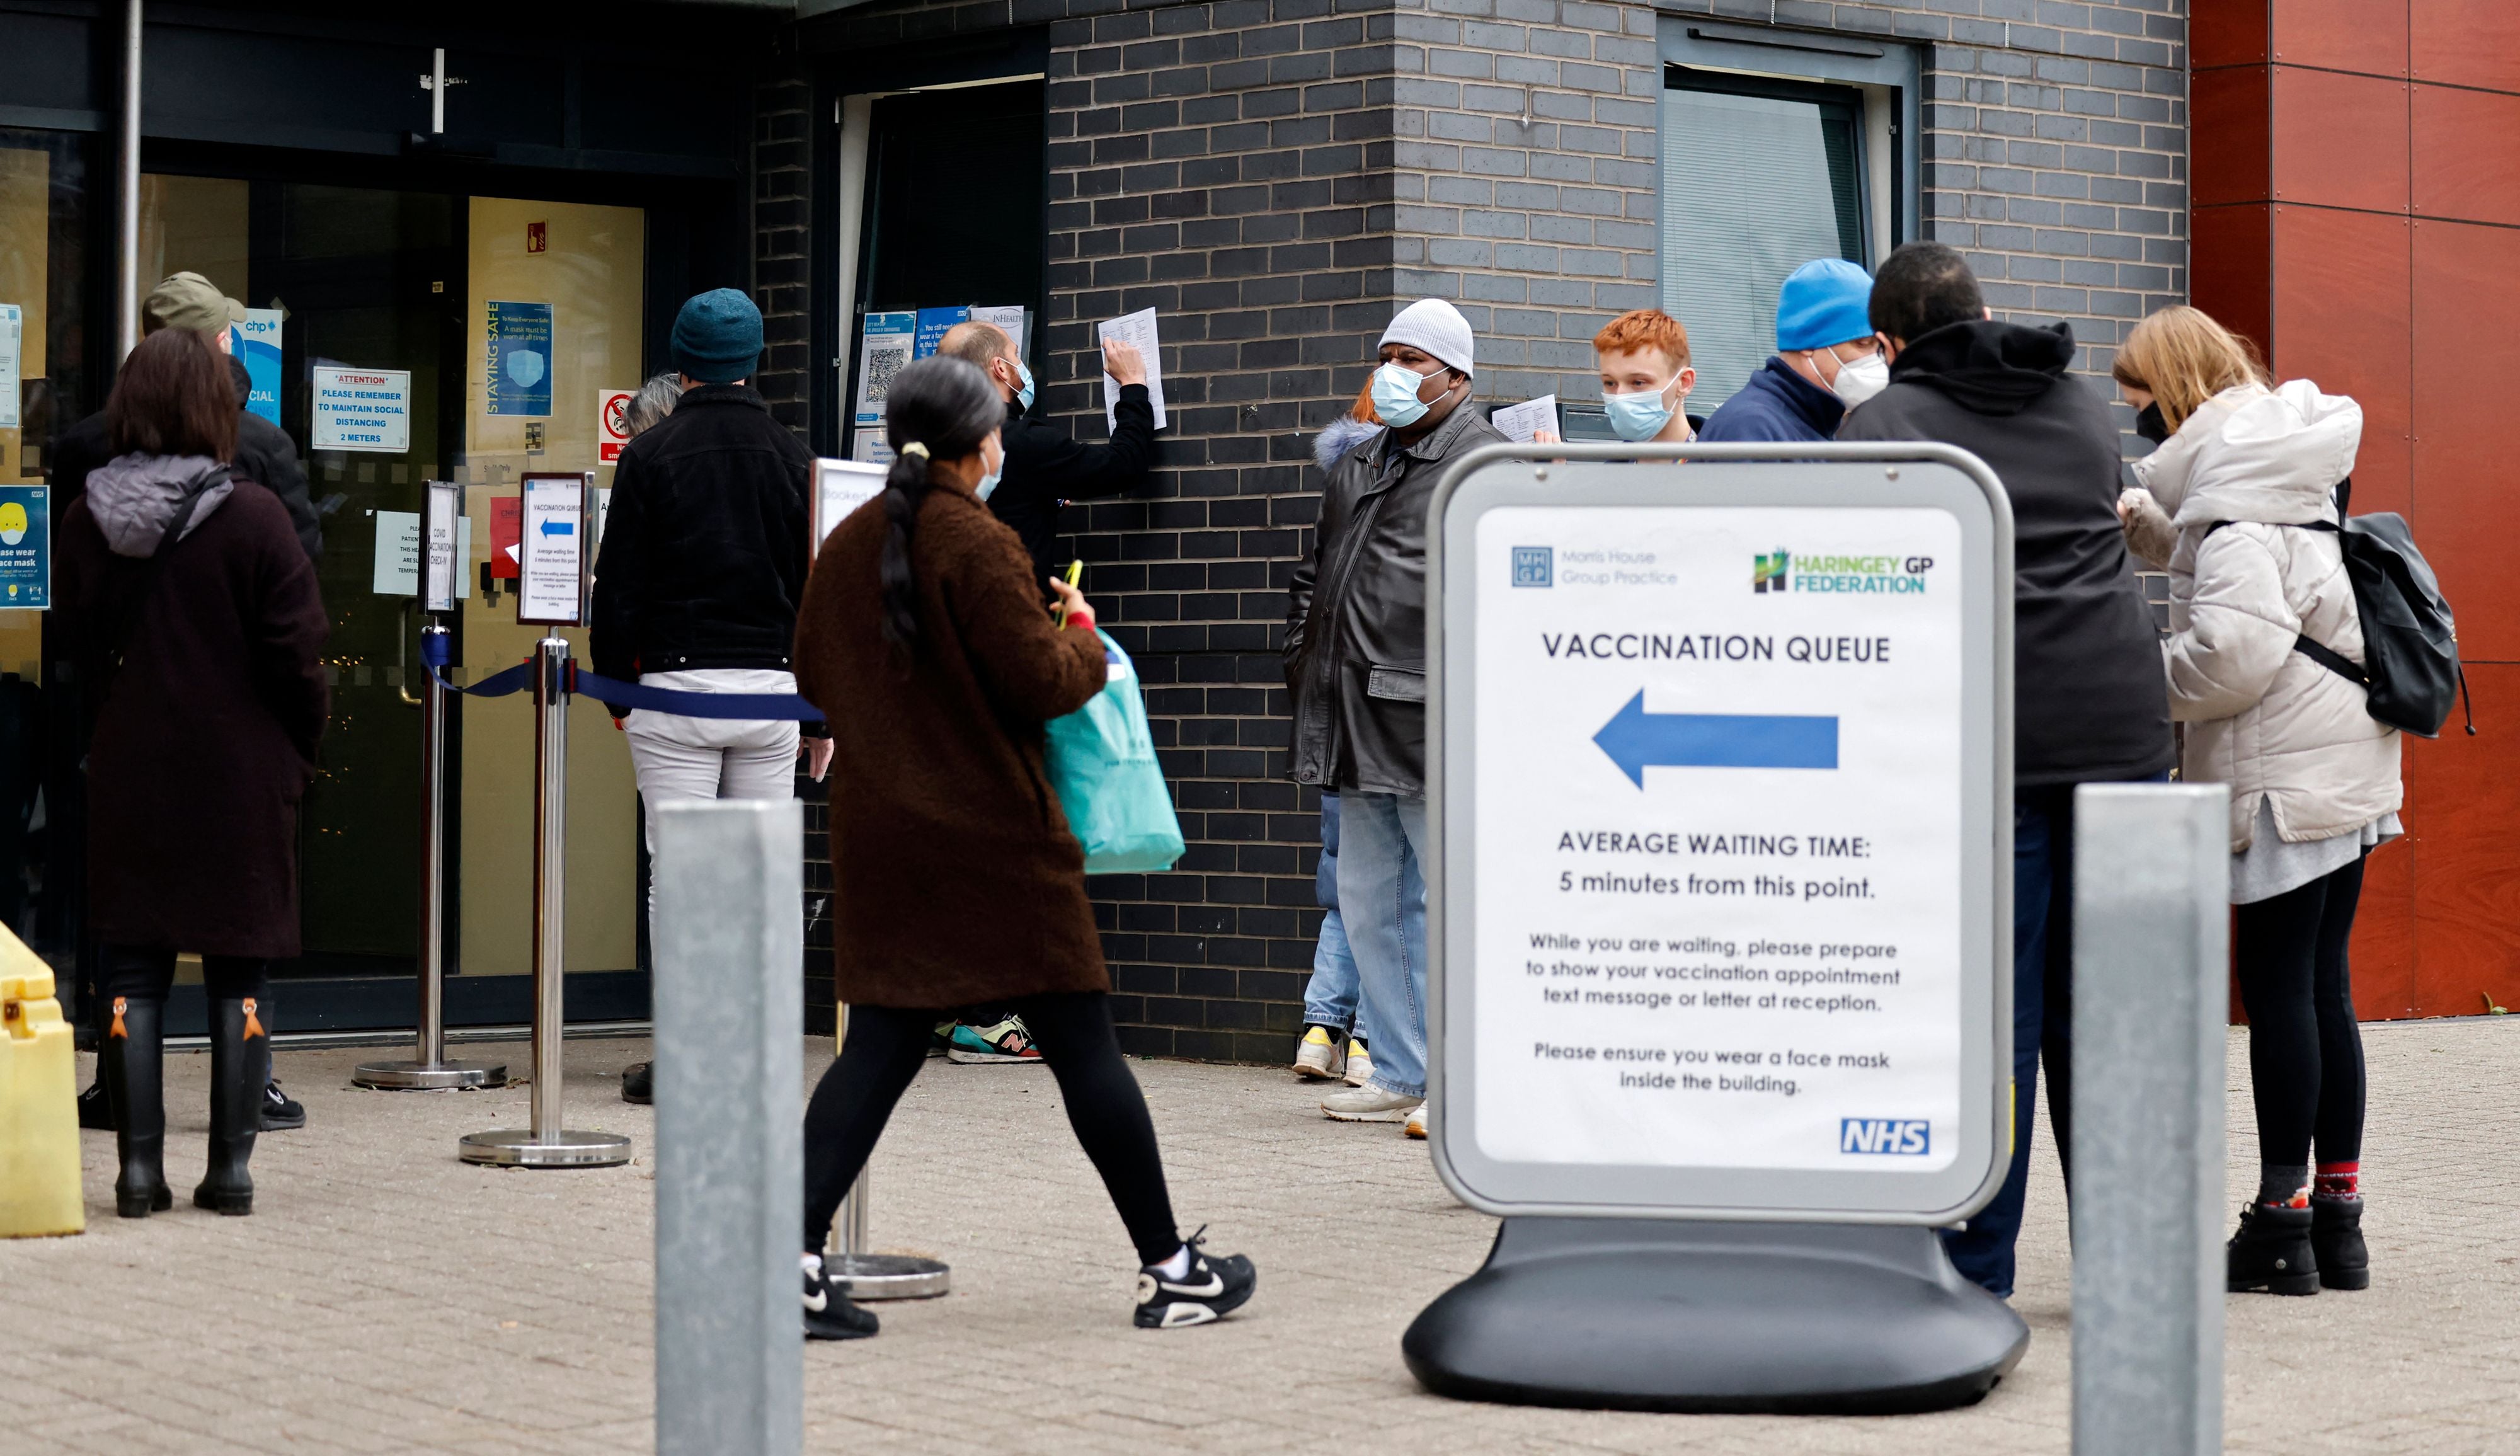 Members of the public queue to receive a first, second or booster dose of a Covid-19 vaccine, outside a 24-hour vaccination centre, in north east London on December 18.